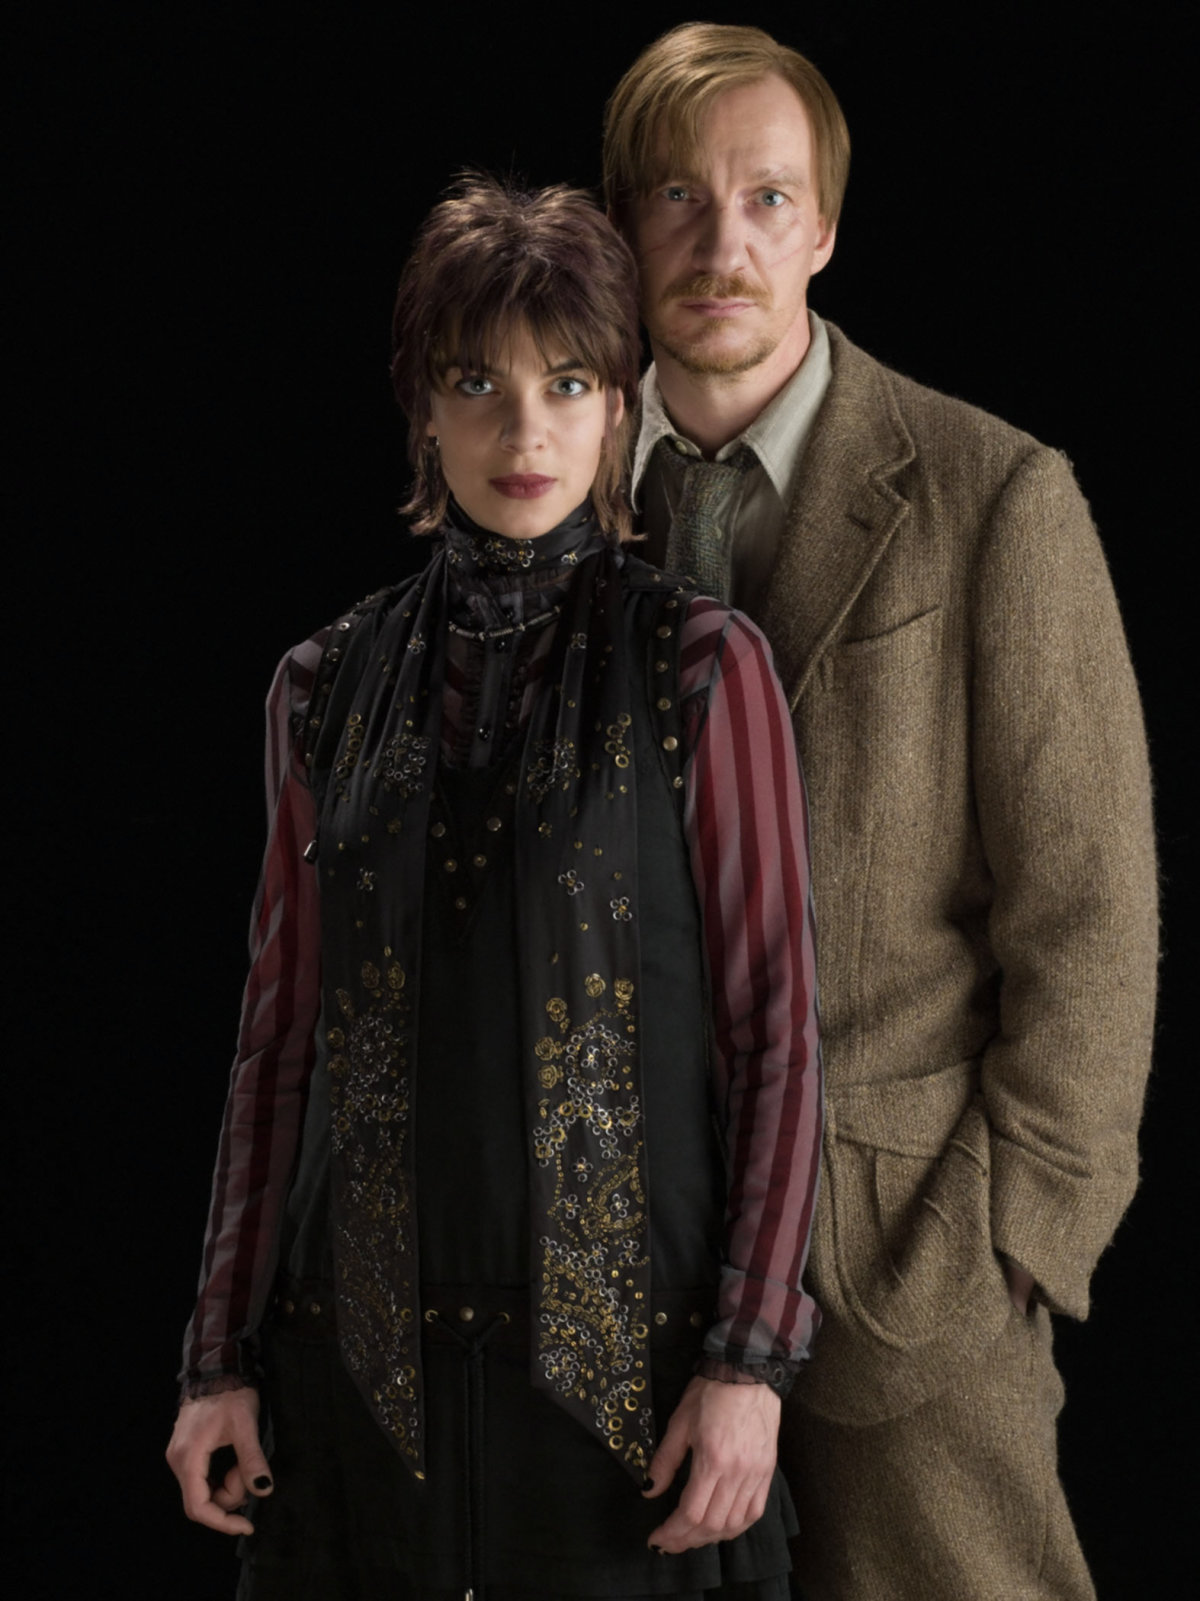 the-tragedy-of-lupin-tonks-in-harry-potter-wizarding-world